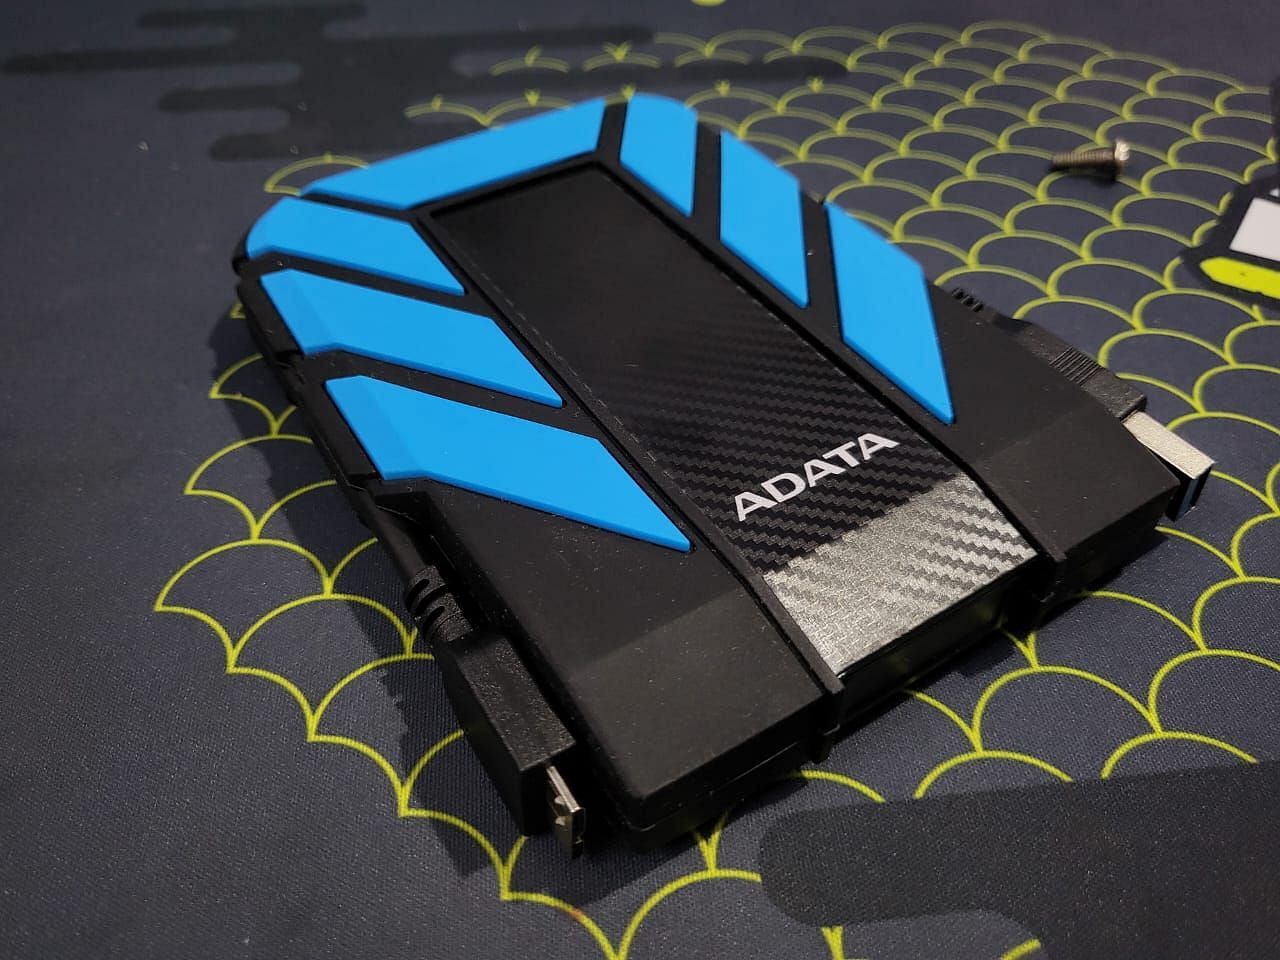 ADATA HD710 Pro 1TB review: Your data